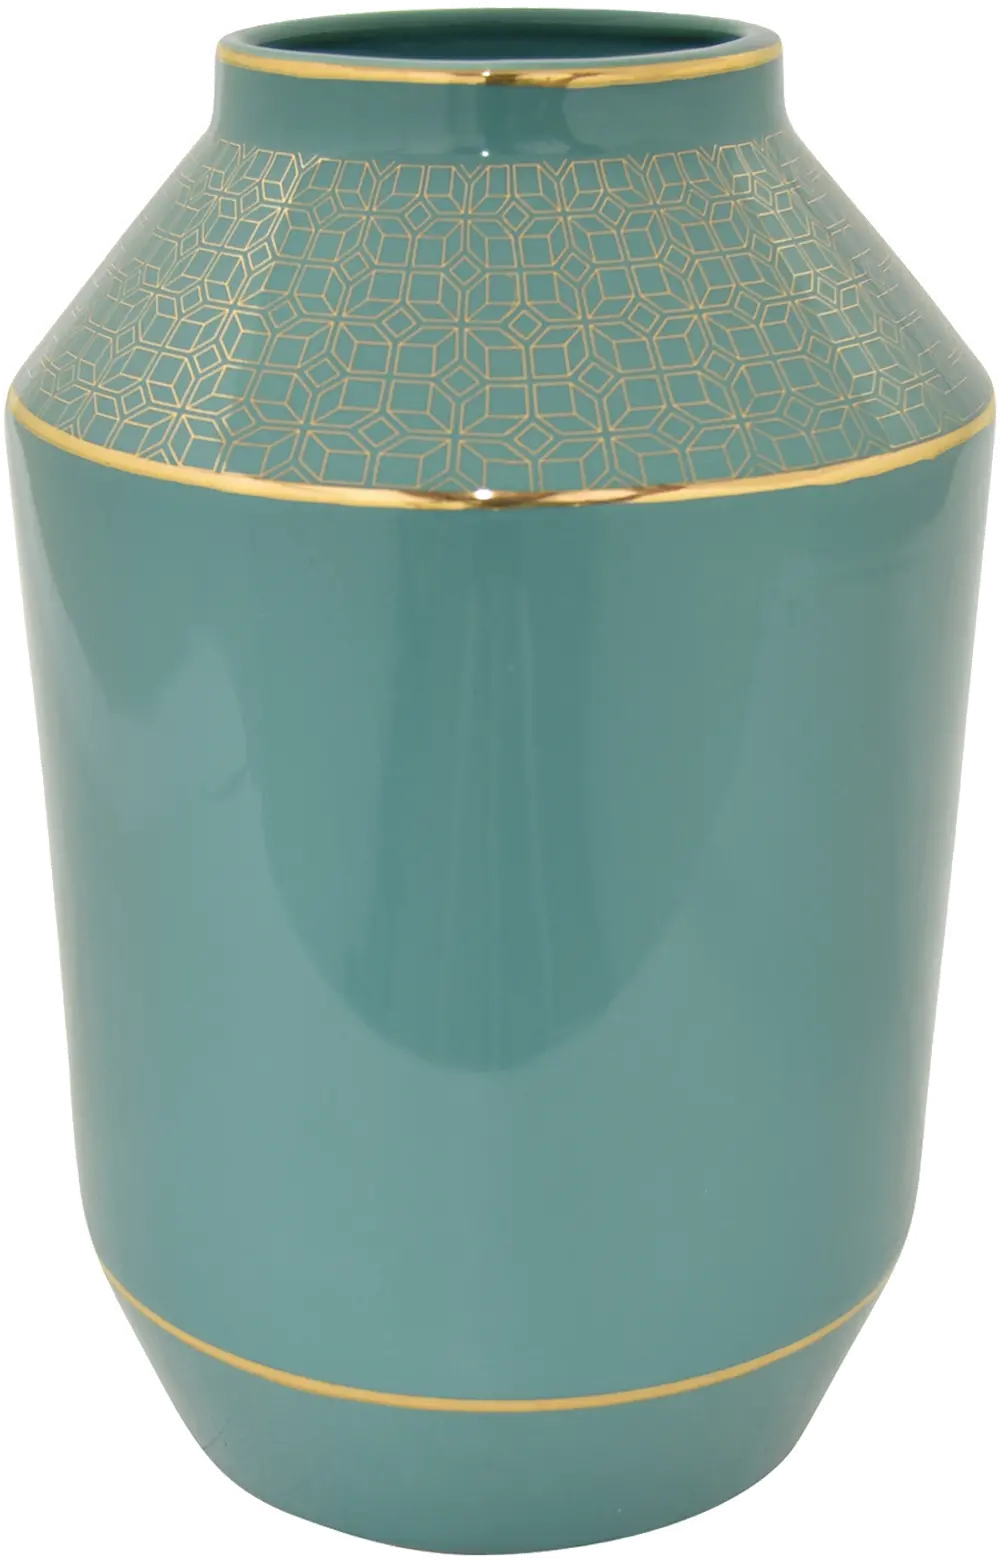 12 Inch Turquoise and Gold Porcelain Vase-1